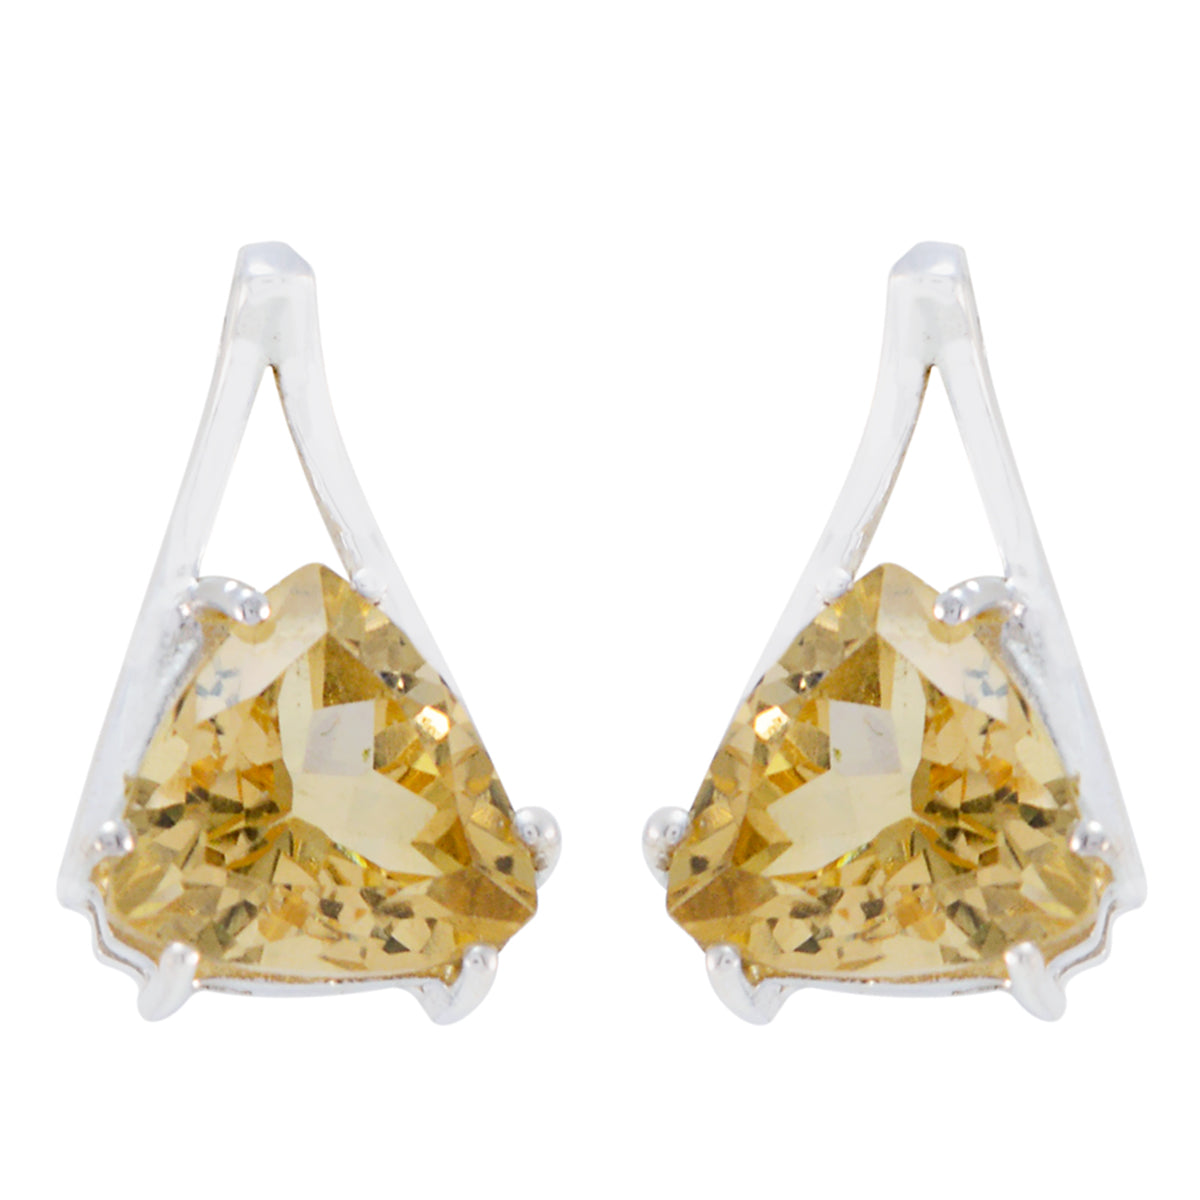 Riyo Nice Gemstone trillion Faceted Yellow Citrine Silver Earring gift for christmas day